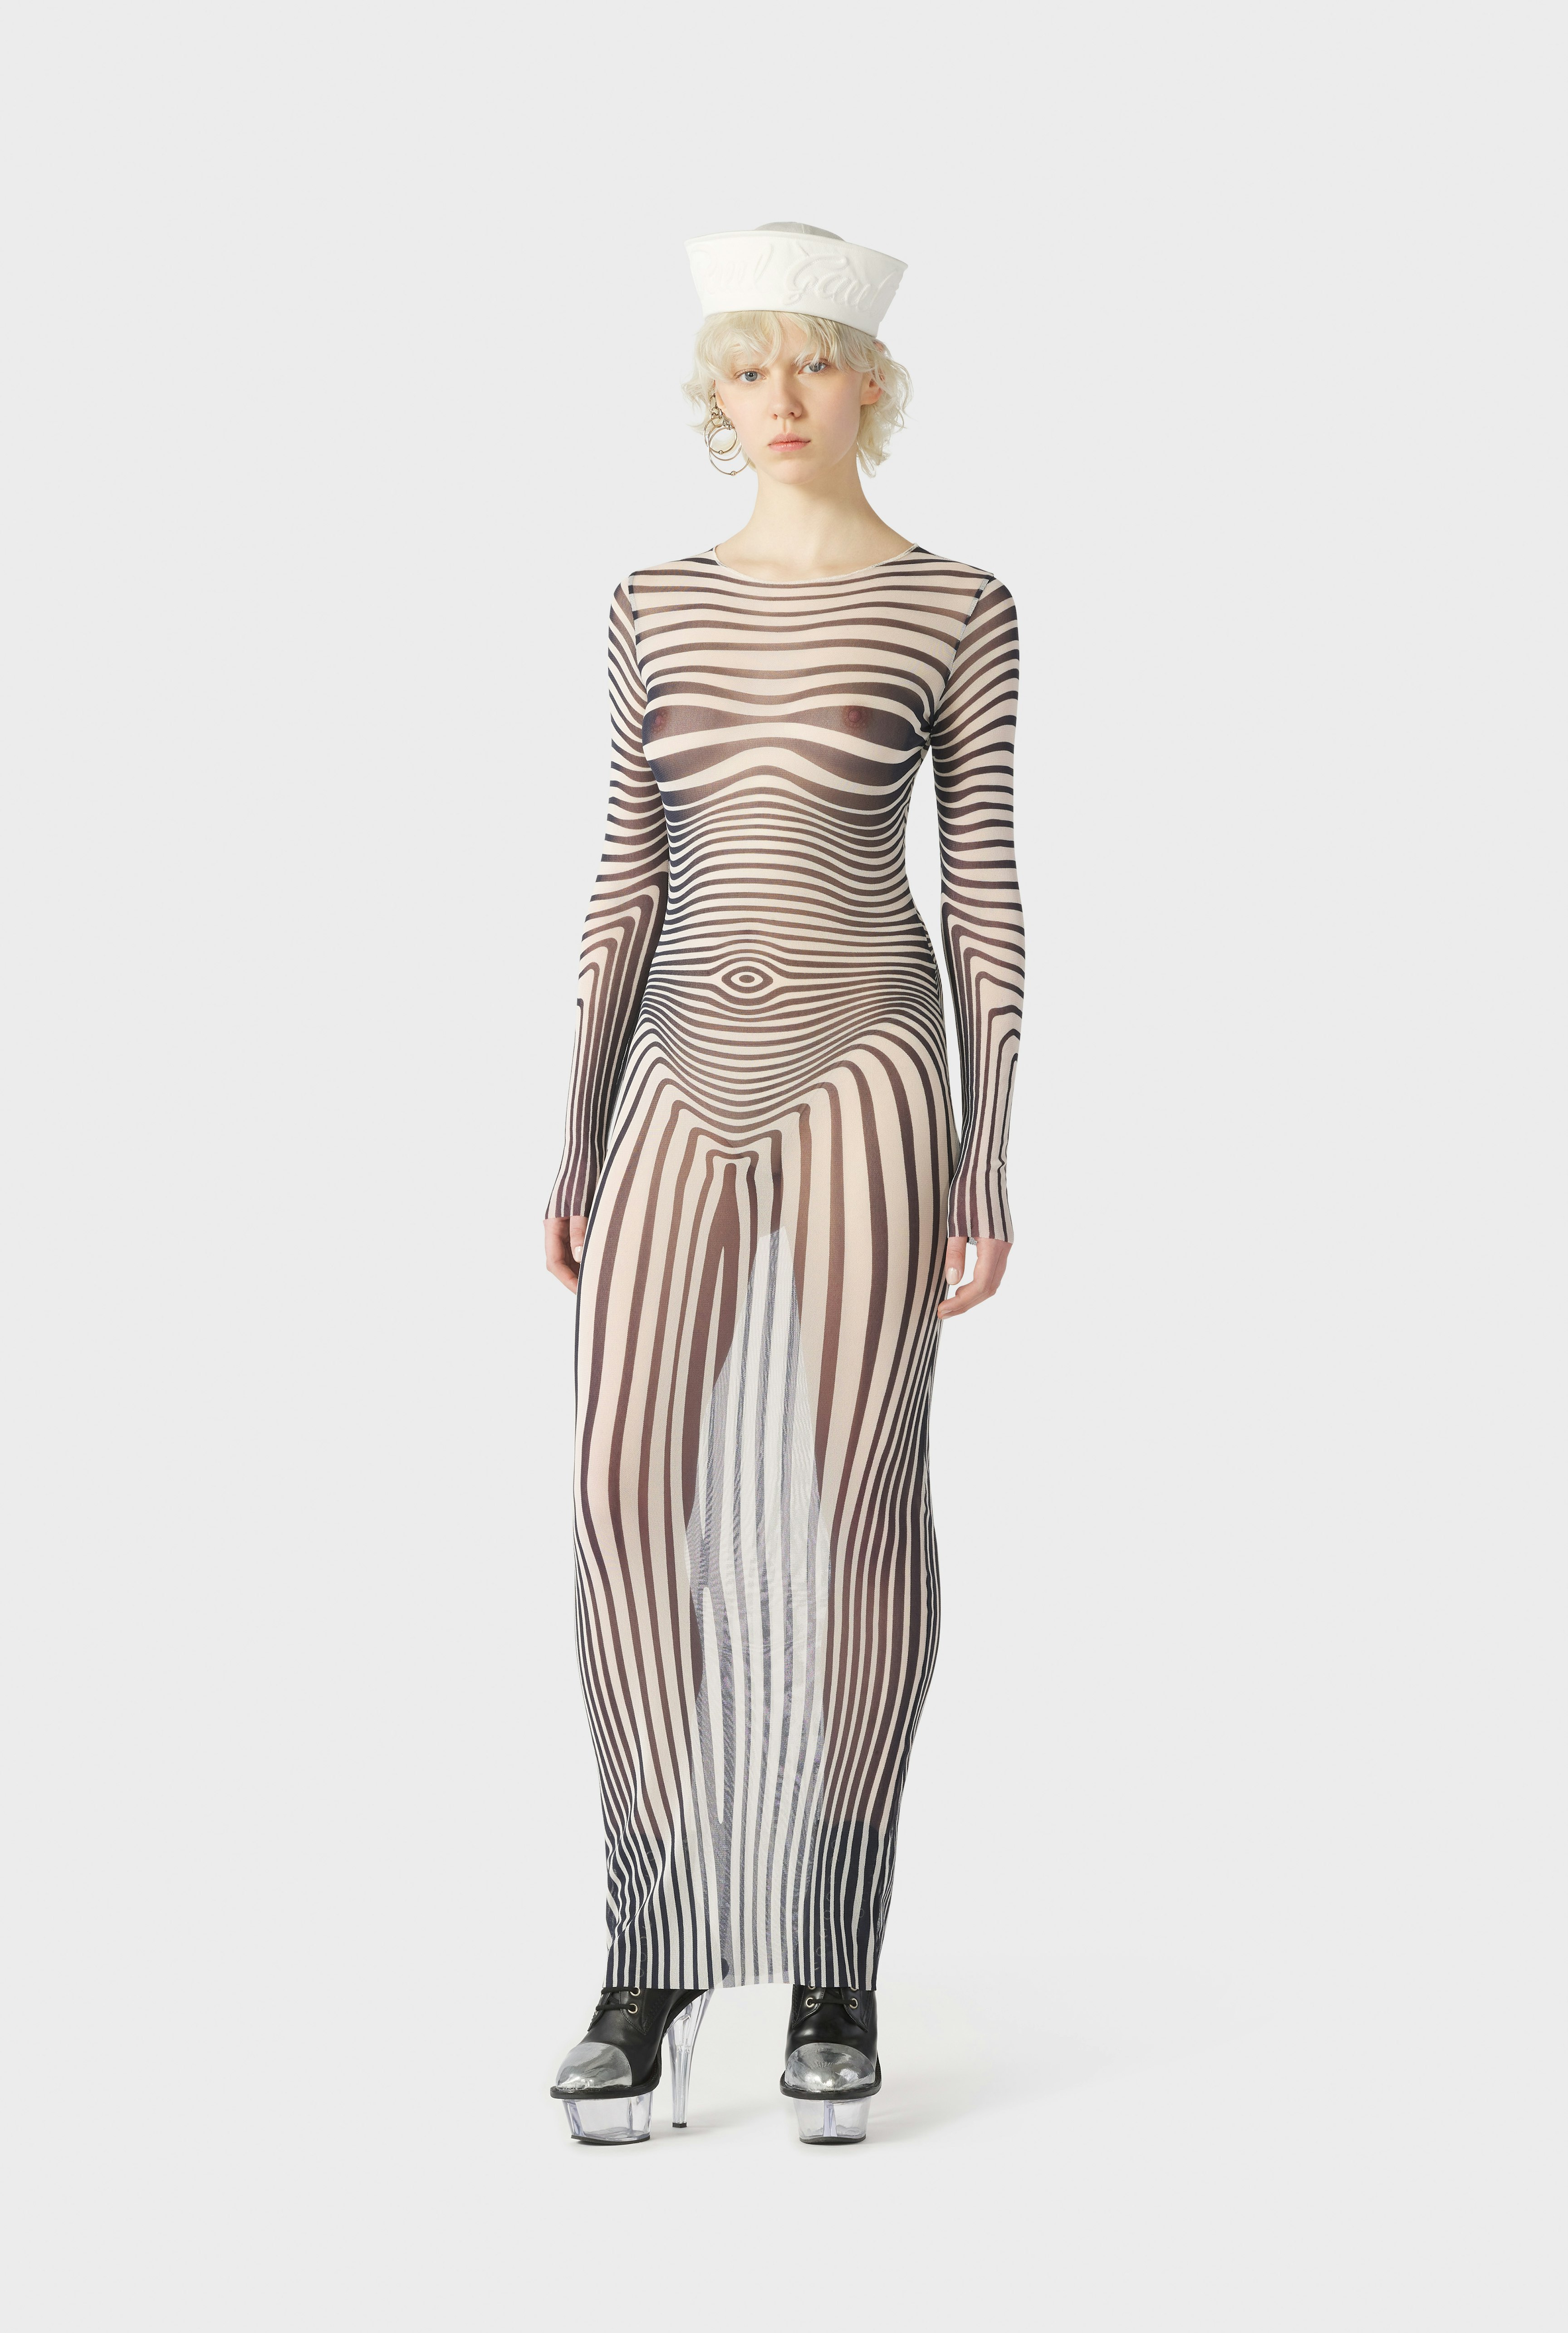 The Body Morphing Dress